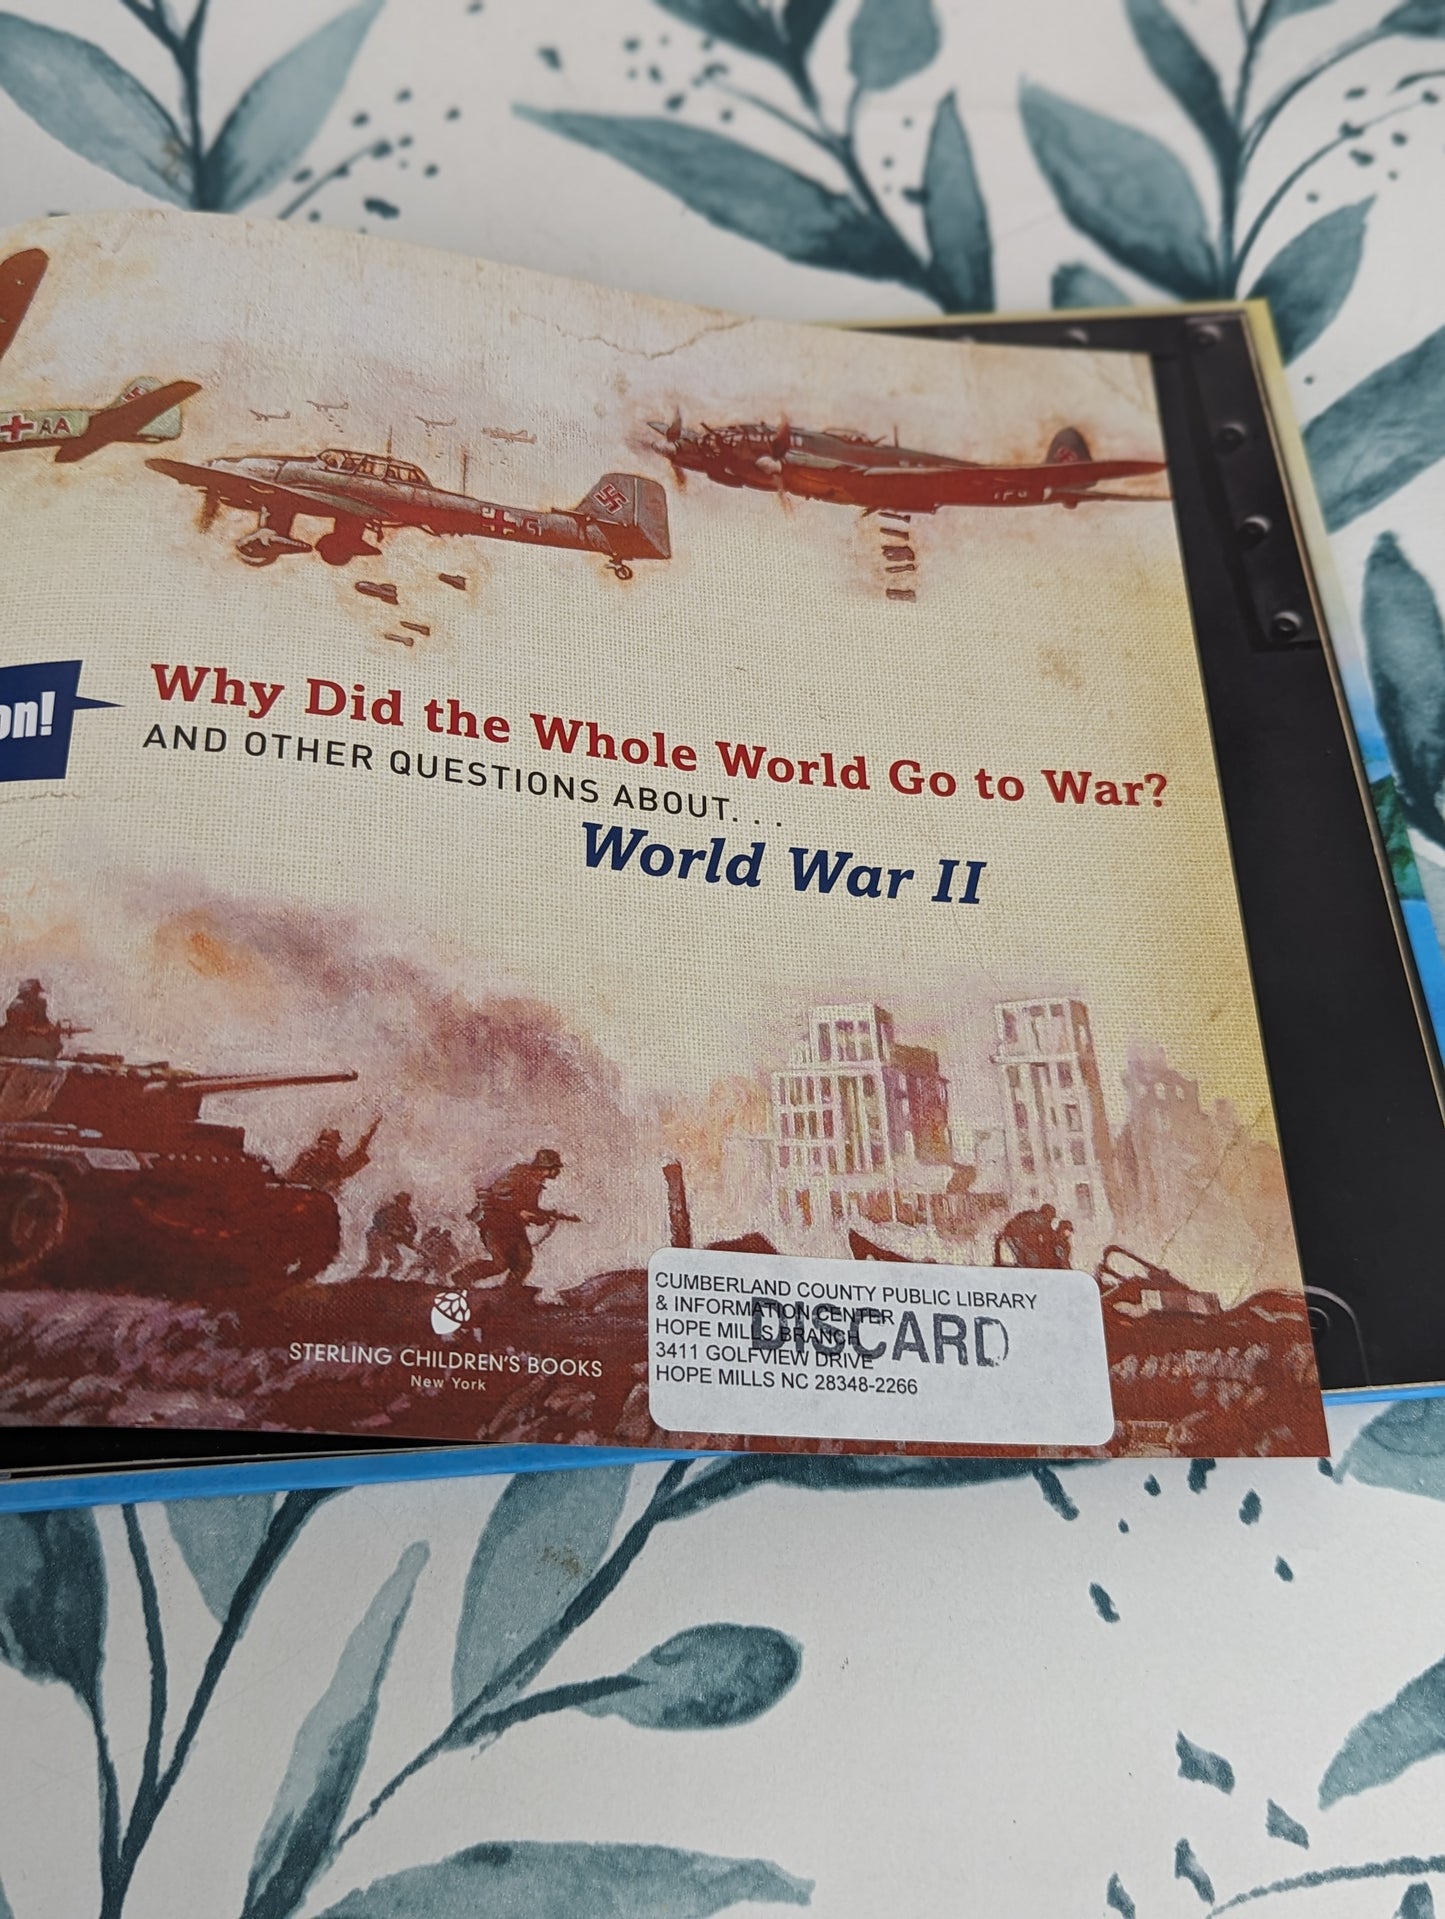 Why Did the Whole World Go To War? And Other Questions about... World War II